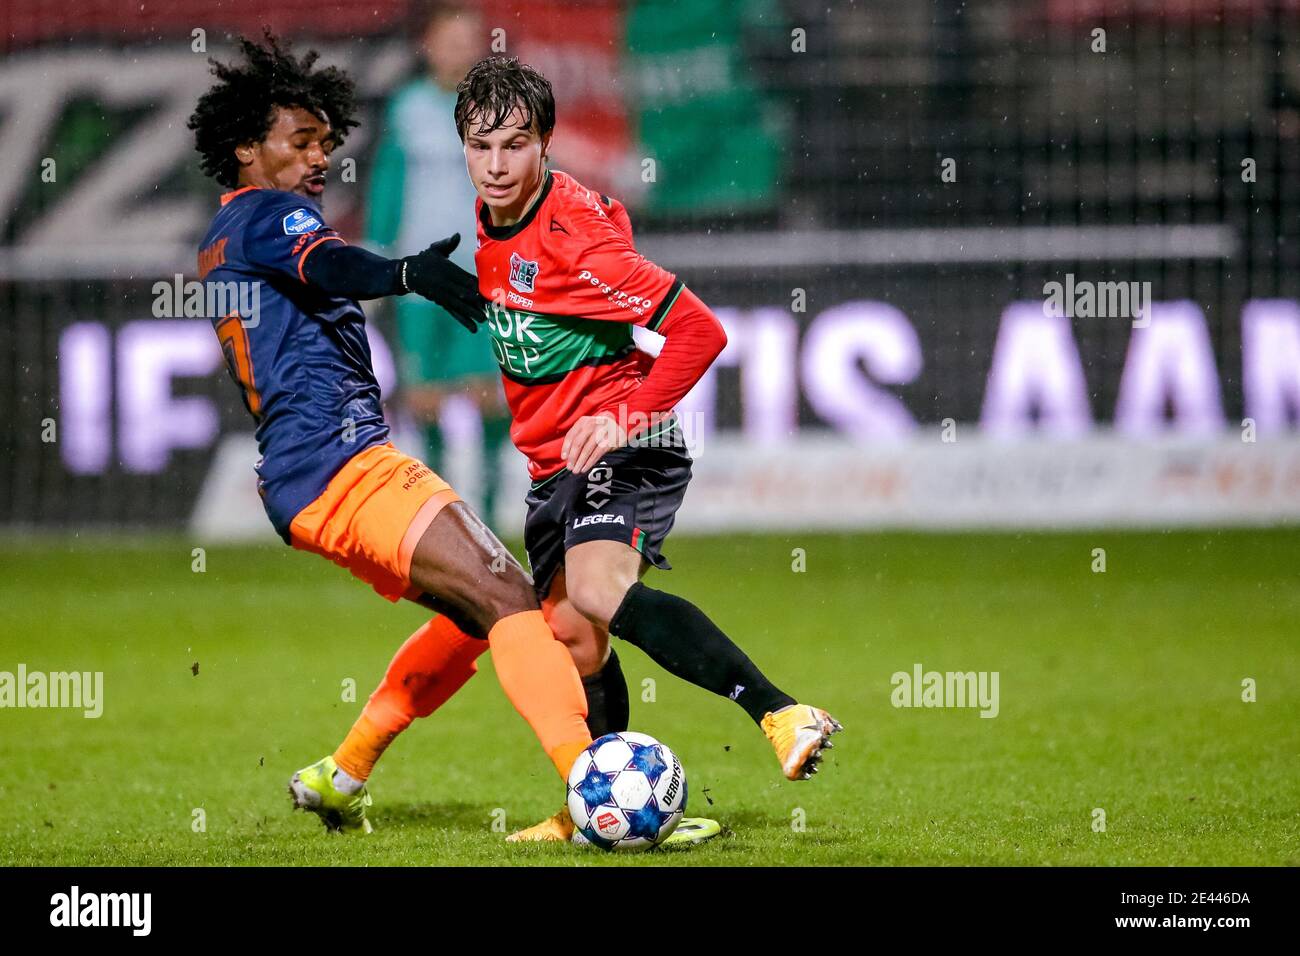 NIJMEGEN, NETHERLANDS - JANUARY 21: (L-R): Samuel Moutoussamy of Fortuna Sittard, Dirk Proper of NEC during the Dutch KNVB Cup match between NEC and F Stock Photo